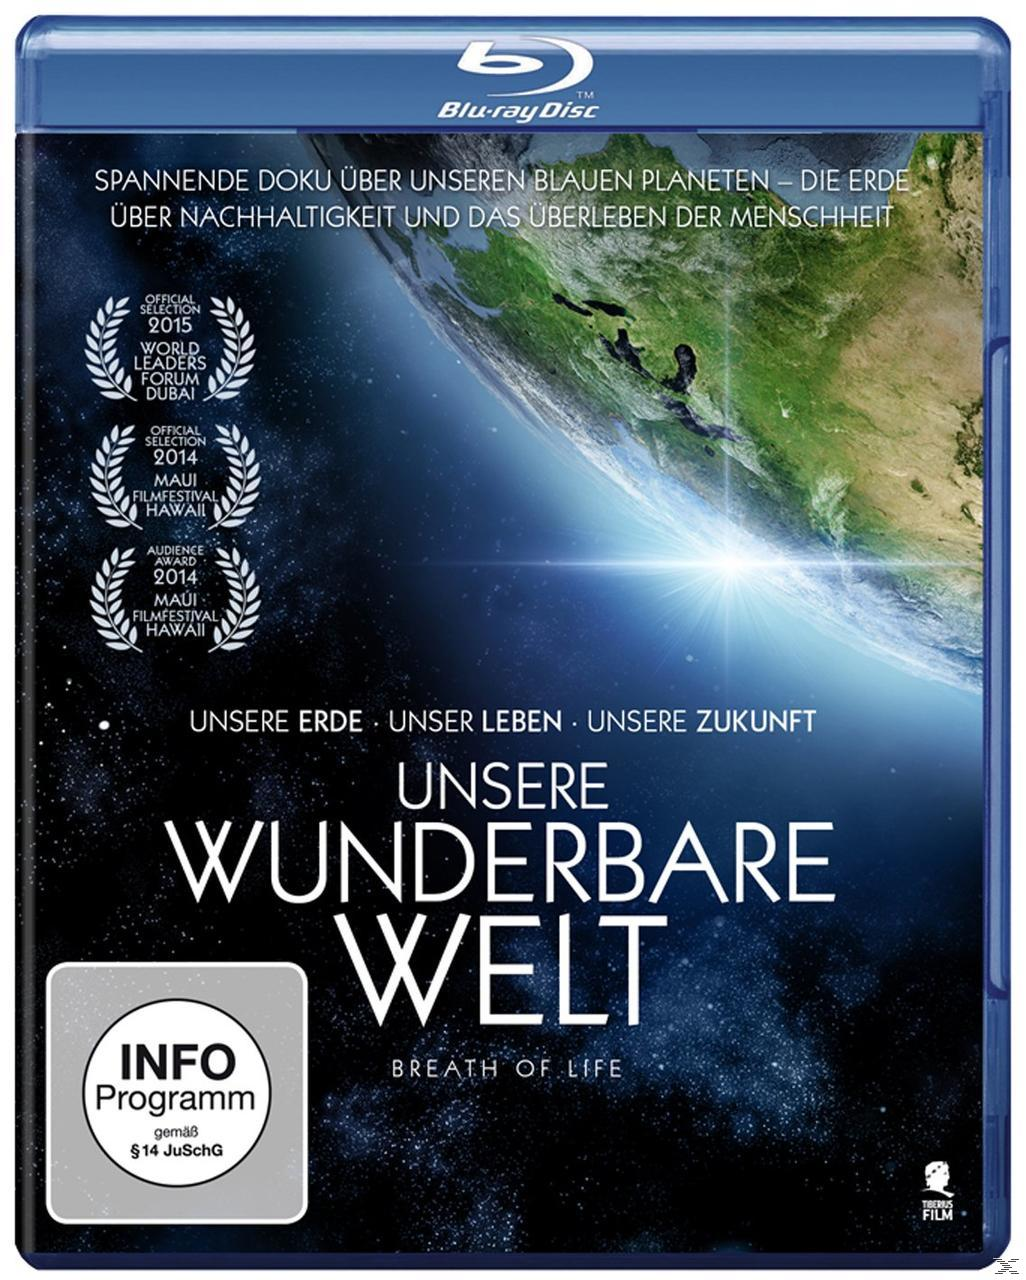 of Welt Breath Blu-ray wunderbare Life Unsere -